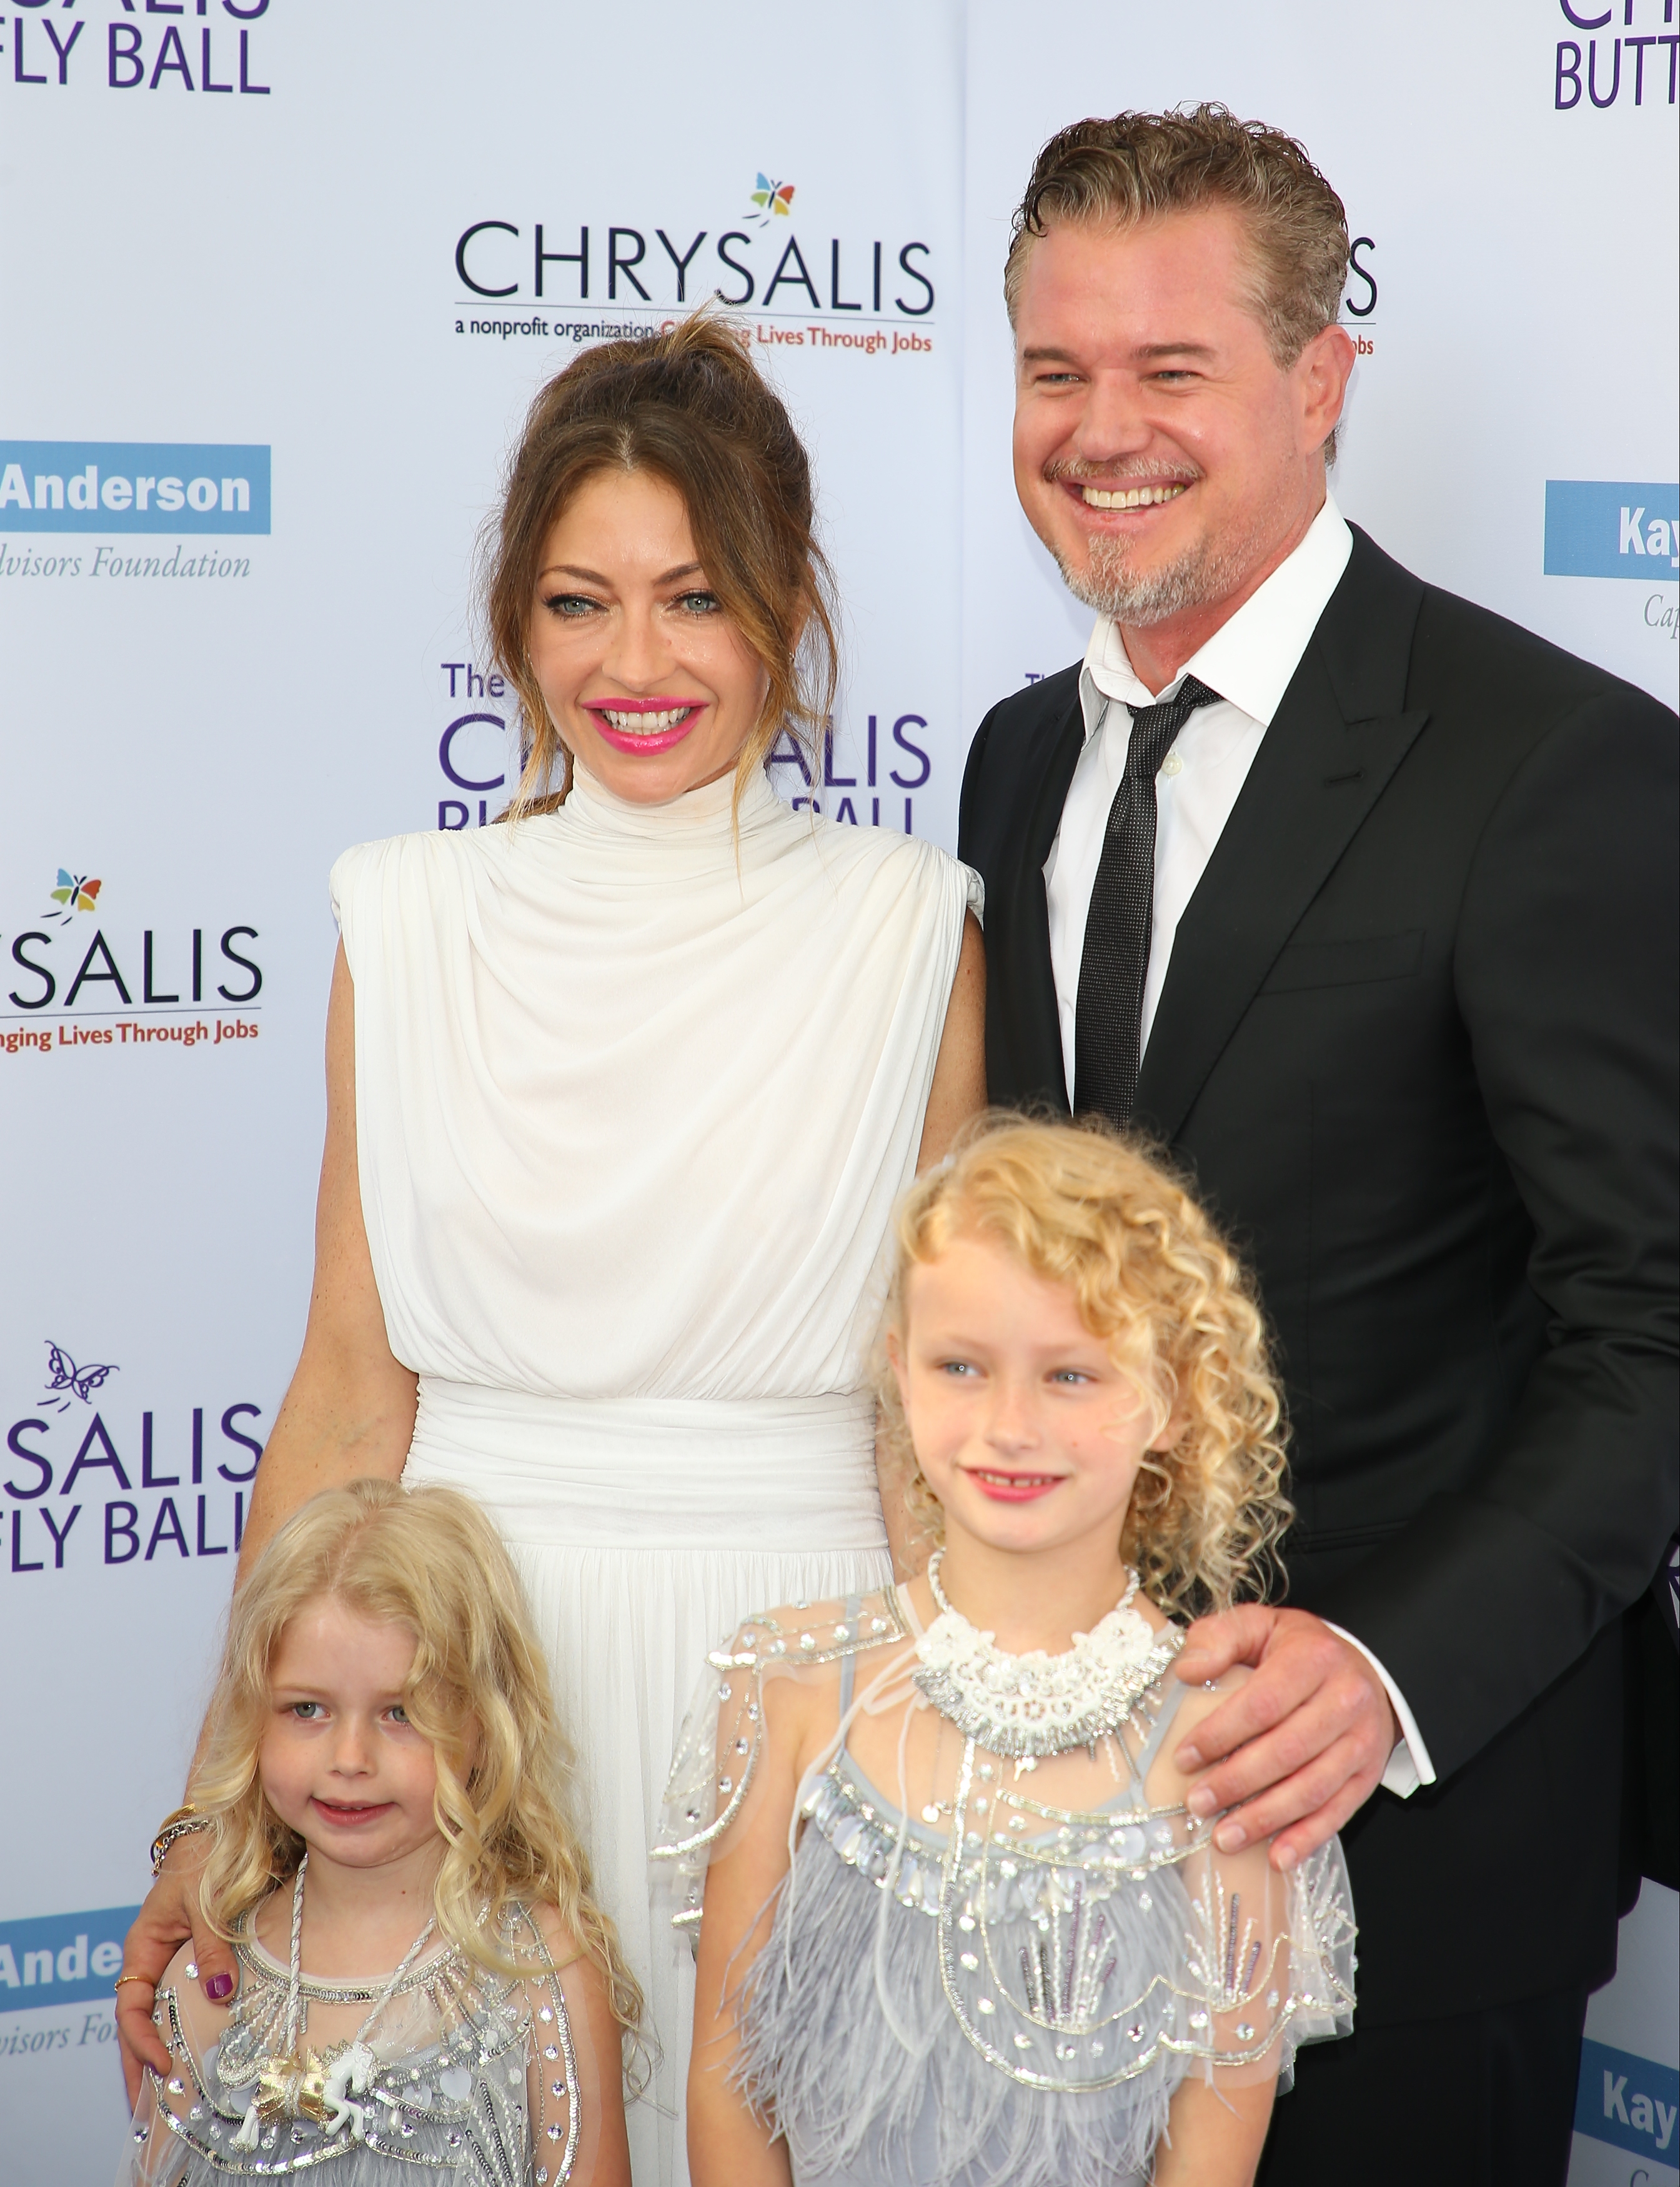 Georgia Geraldine Dane, Rebecca Gayheart, Billie Beatrice Dane, and Eric Dane at the 16th Annual Chrysalis Butterfly Ball in Brentwood, California on June 3, 2017 | Source: Getty Images